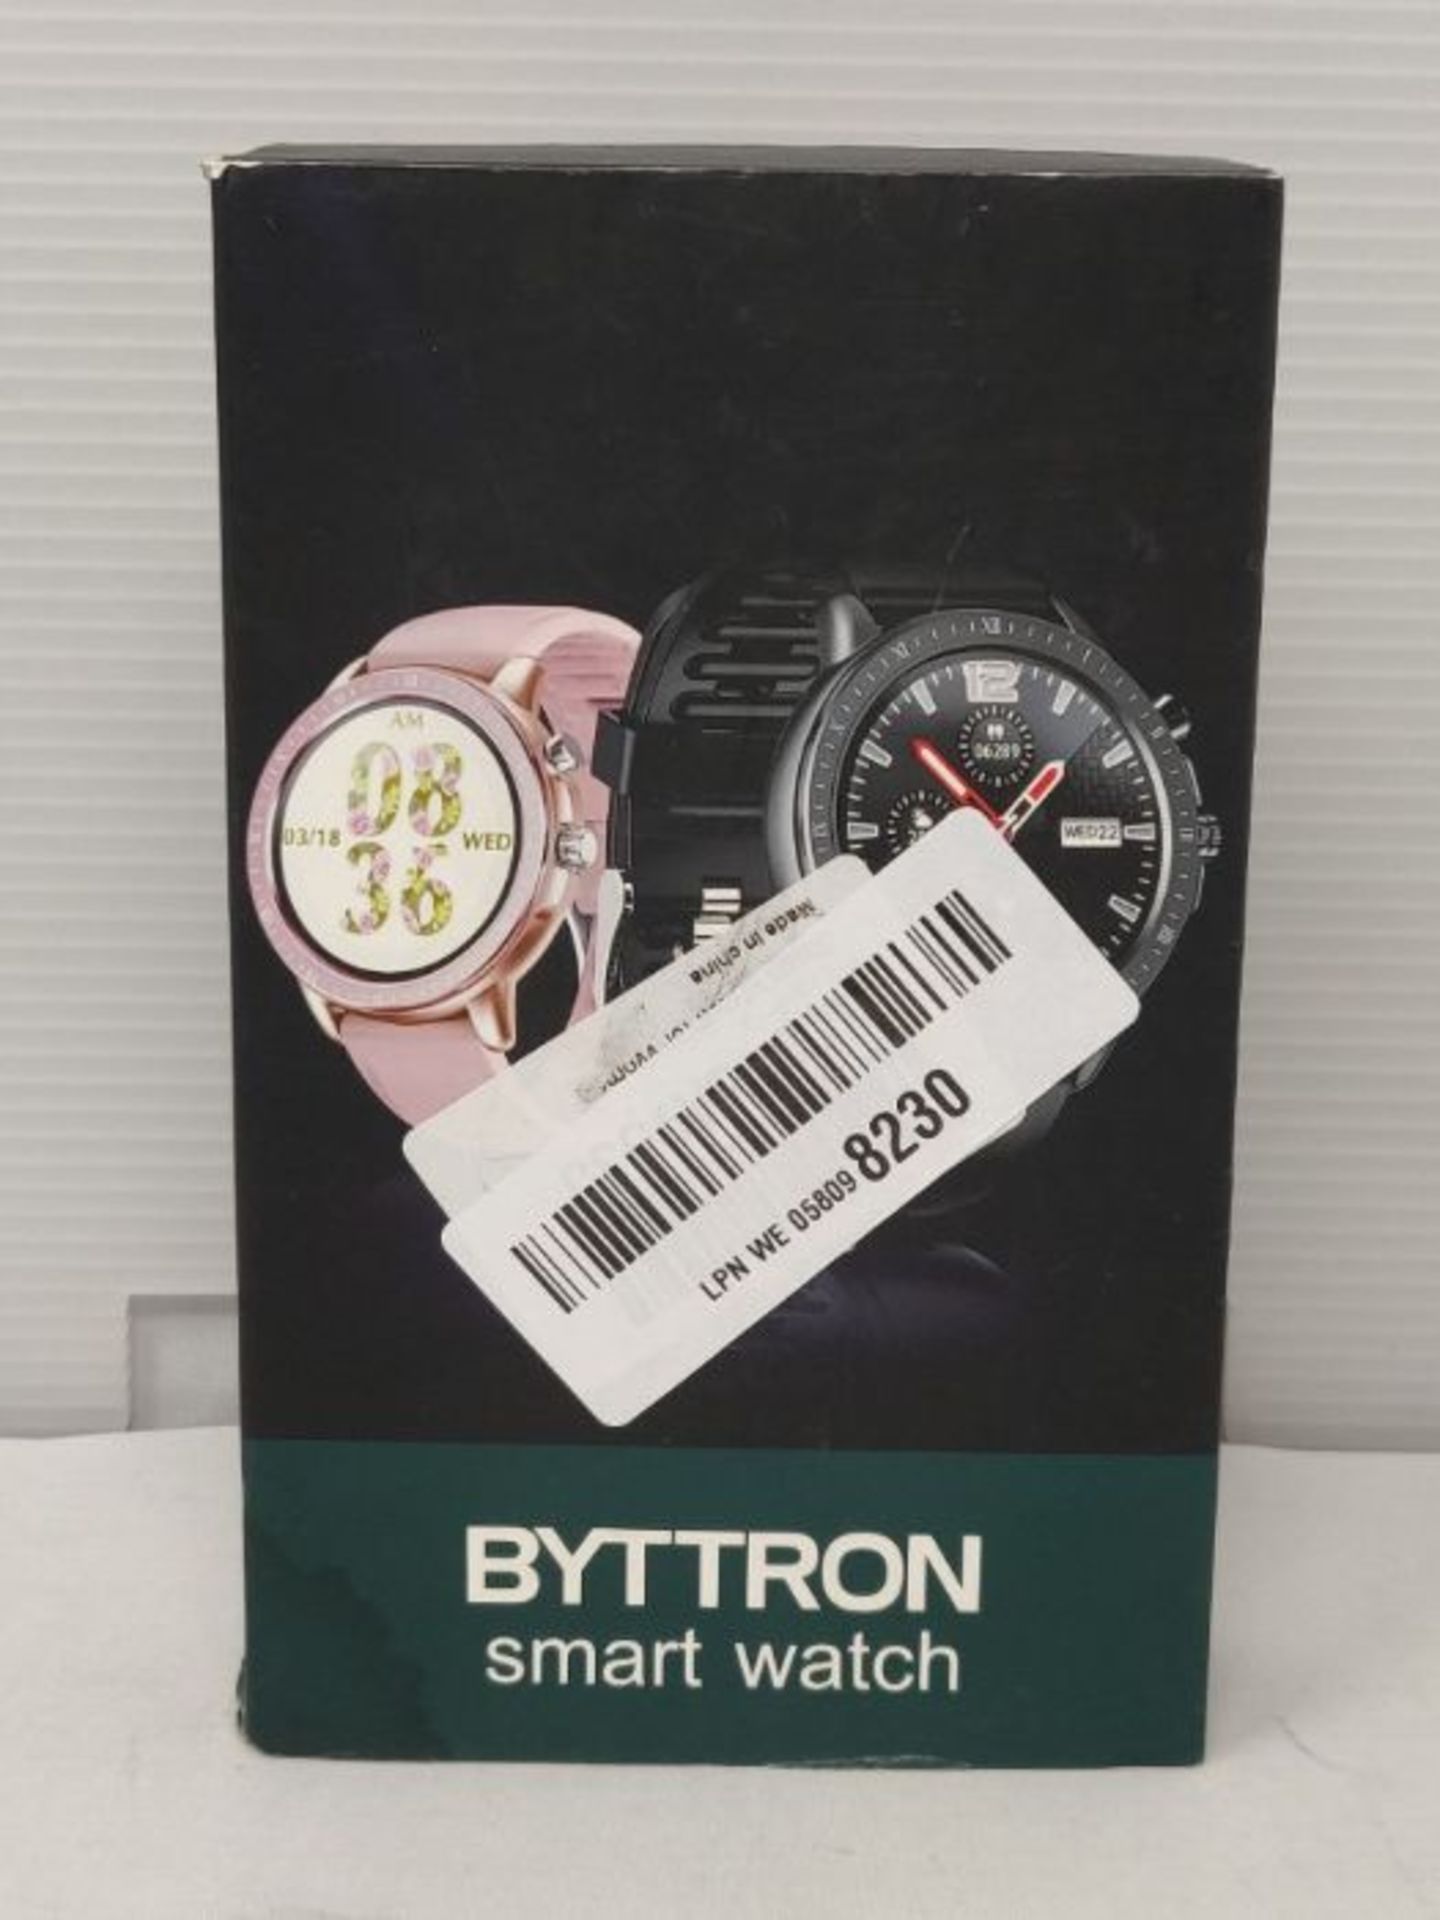 BYTTRON Smart Watch,1.3" Full Touch Screen Waterproof Fitness Tracker with Heart Rate, - Image 2 of 3